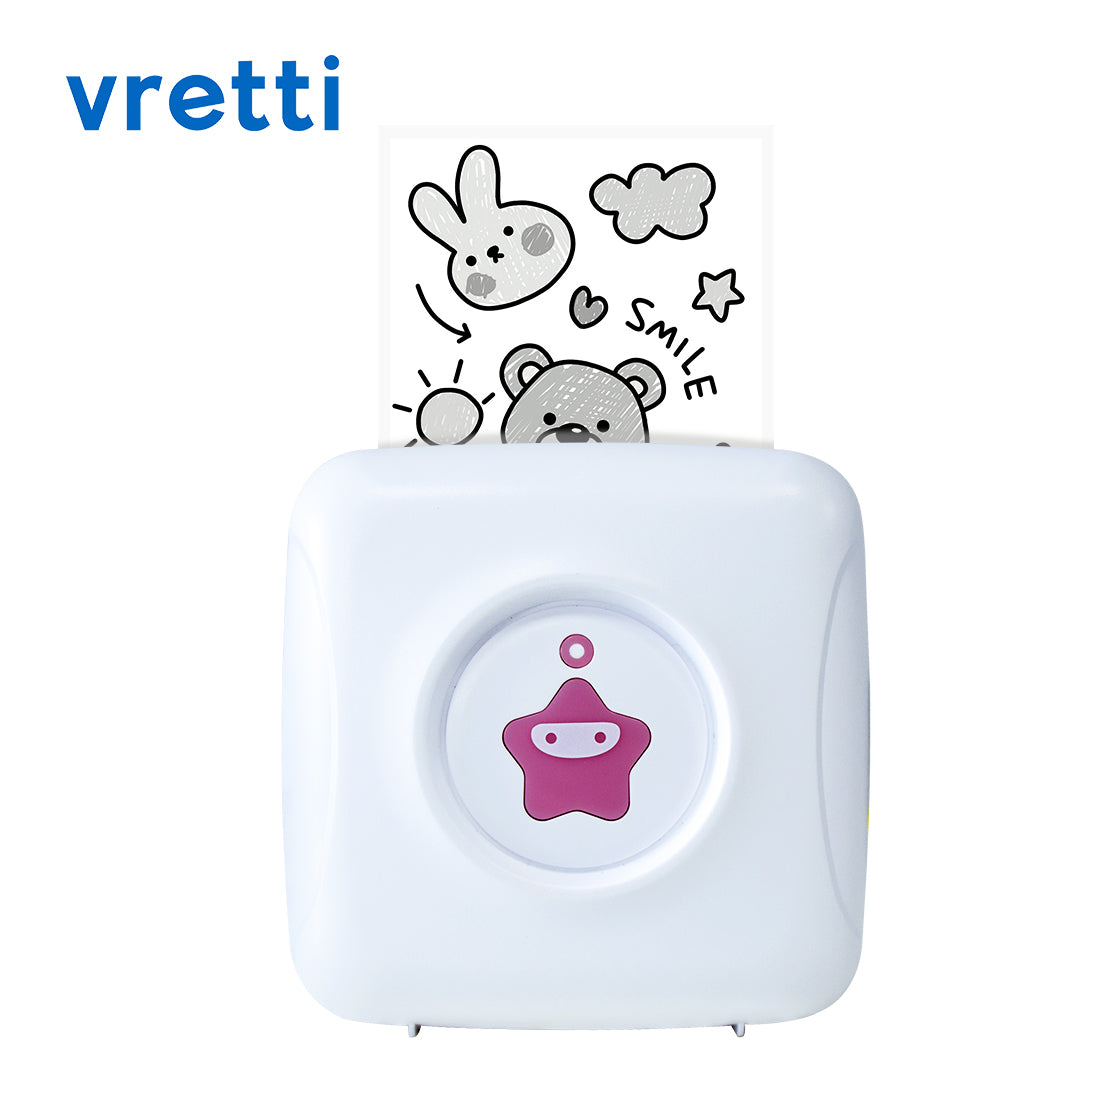 VRETTI Pocket Printer- Mini Bluetooth Portable Mobile Photo Printer Thermal  Printer Compatible with iOS + Android for , Travel, DIY Cards,  Gift,Learning Assistance, Study Notes, Journal, Work 